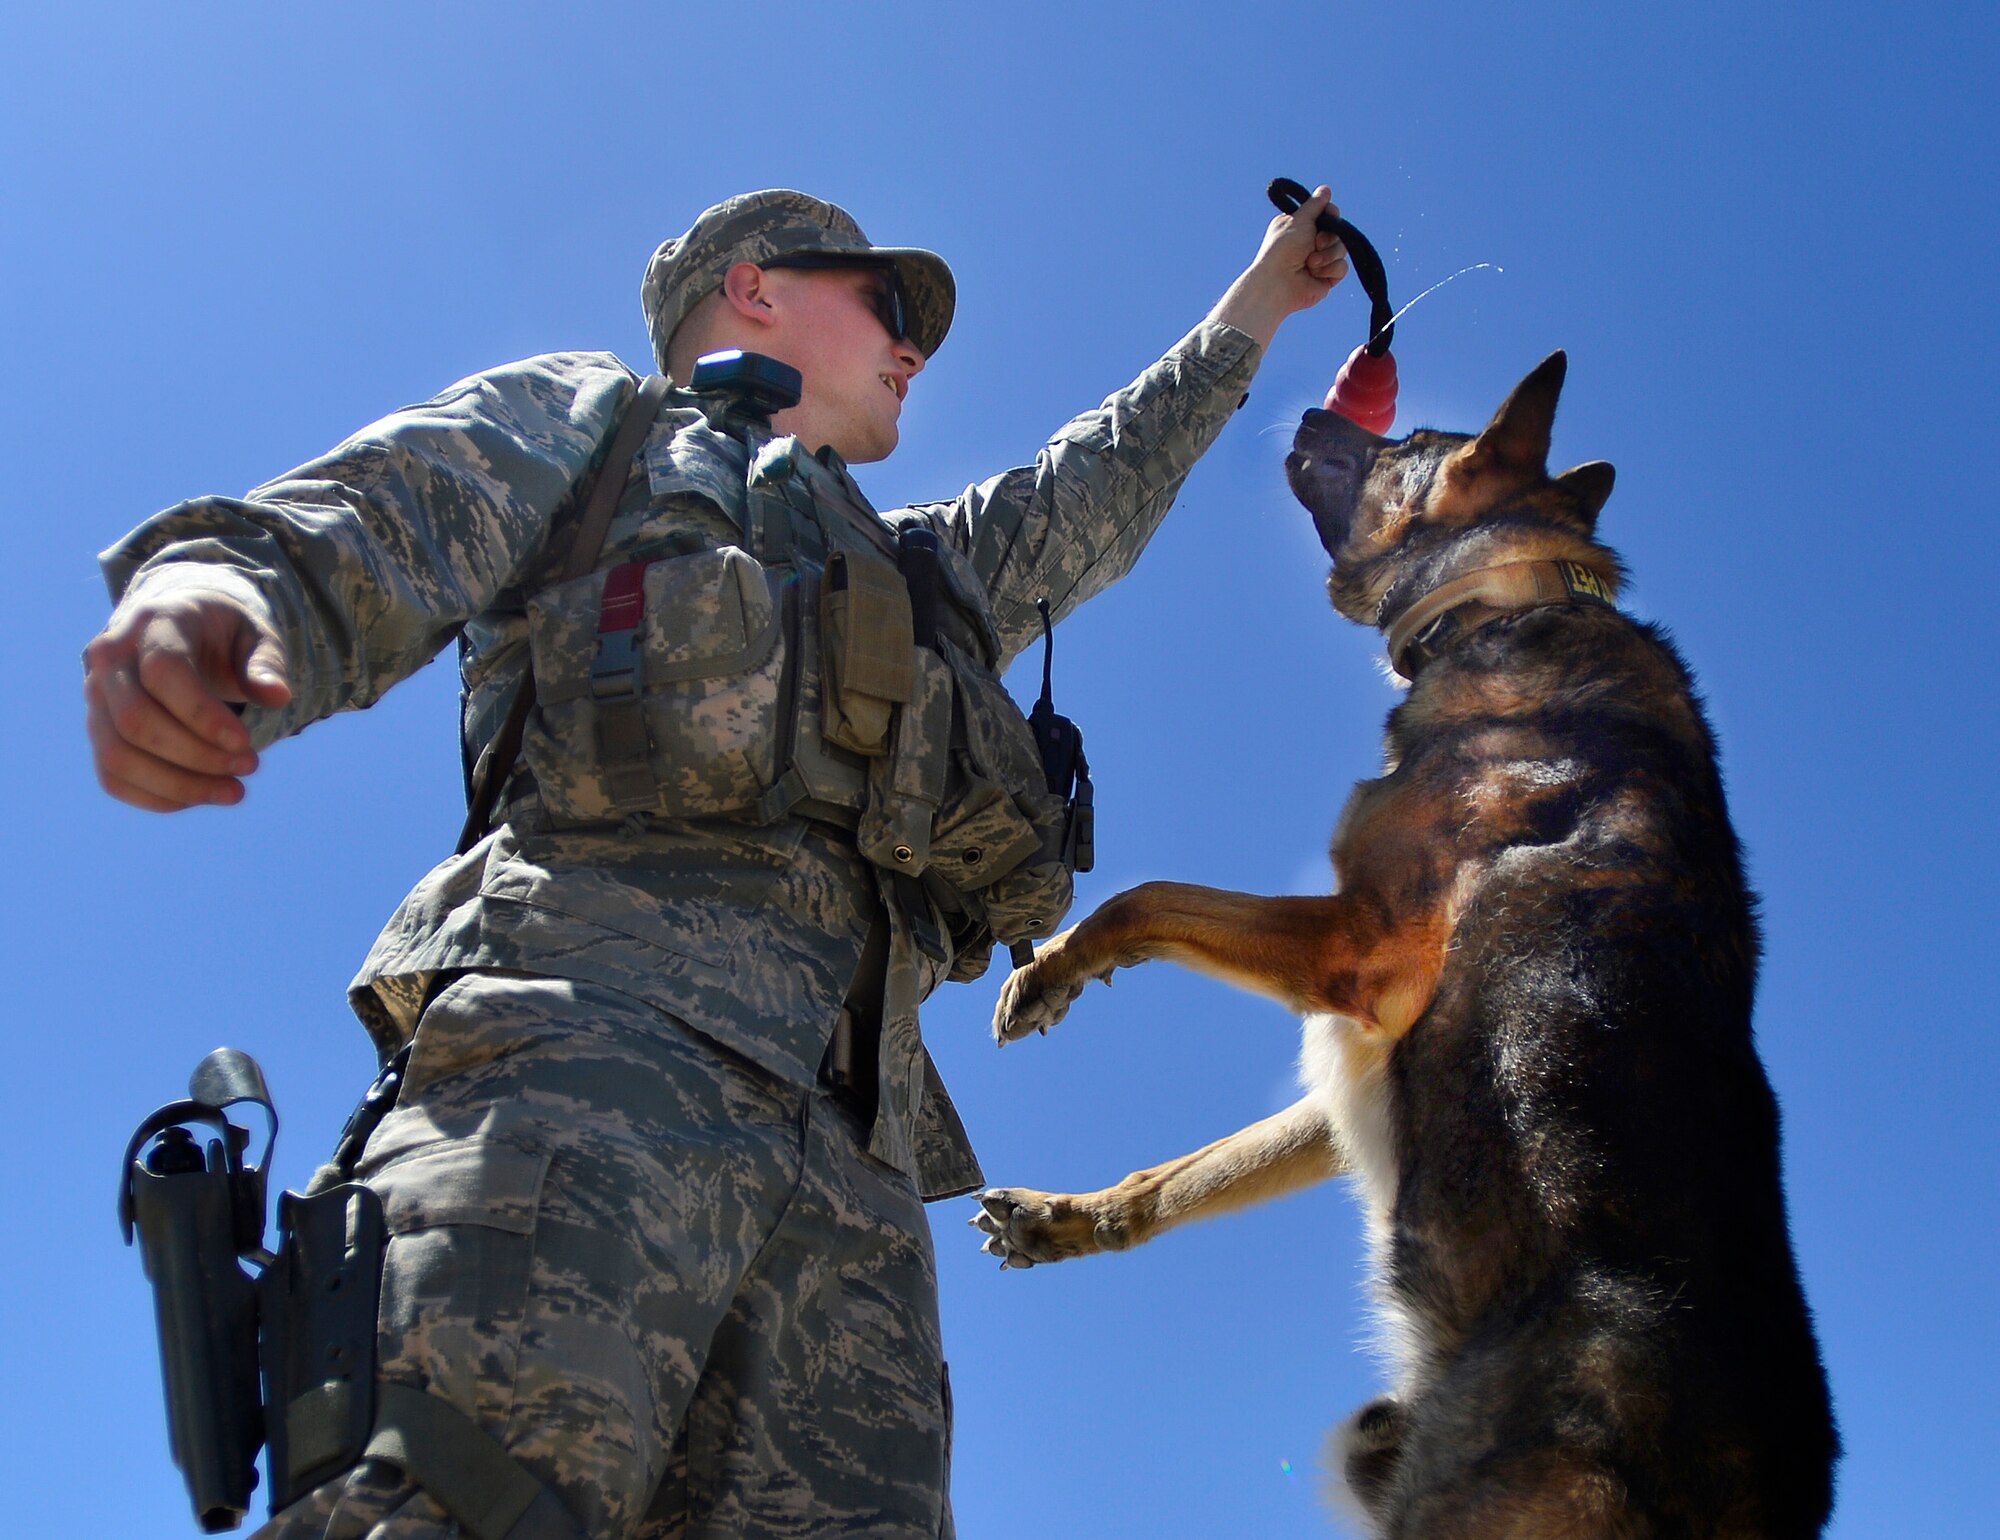 Staff Sgt. John, 799th Security Forces Squadron military working dog handler and MWD Toby take a break after successfully detecting contraband during a training exercise May 11, 2016, at Creech Air Force Base, Nevada. President Harry S. Truman led the effort to establish a single holiday for citizens to come together and thank our military members for their patriotic service in support of our country. (U.S. Air Force photo by Senior Airman Christian Clausen/Released)